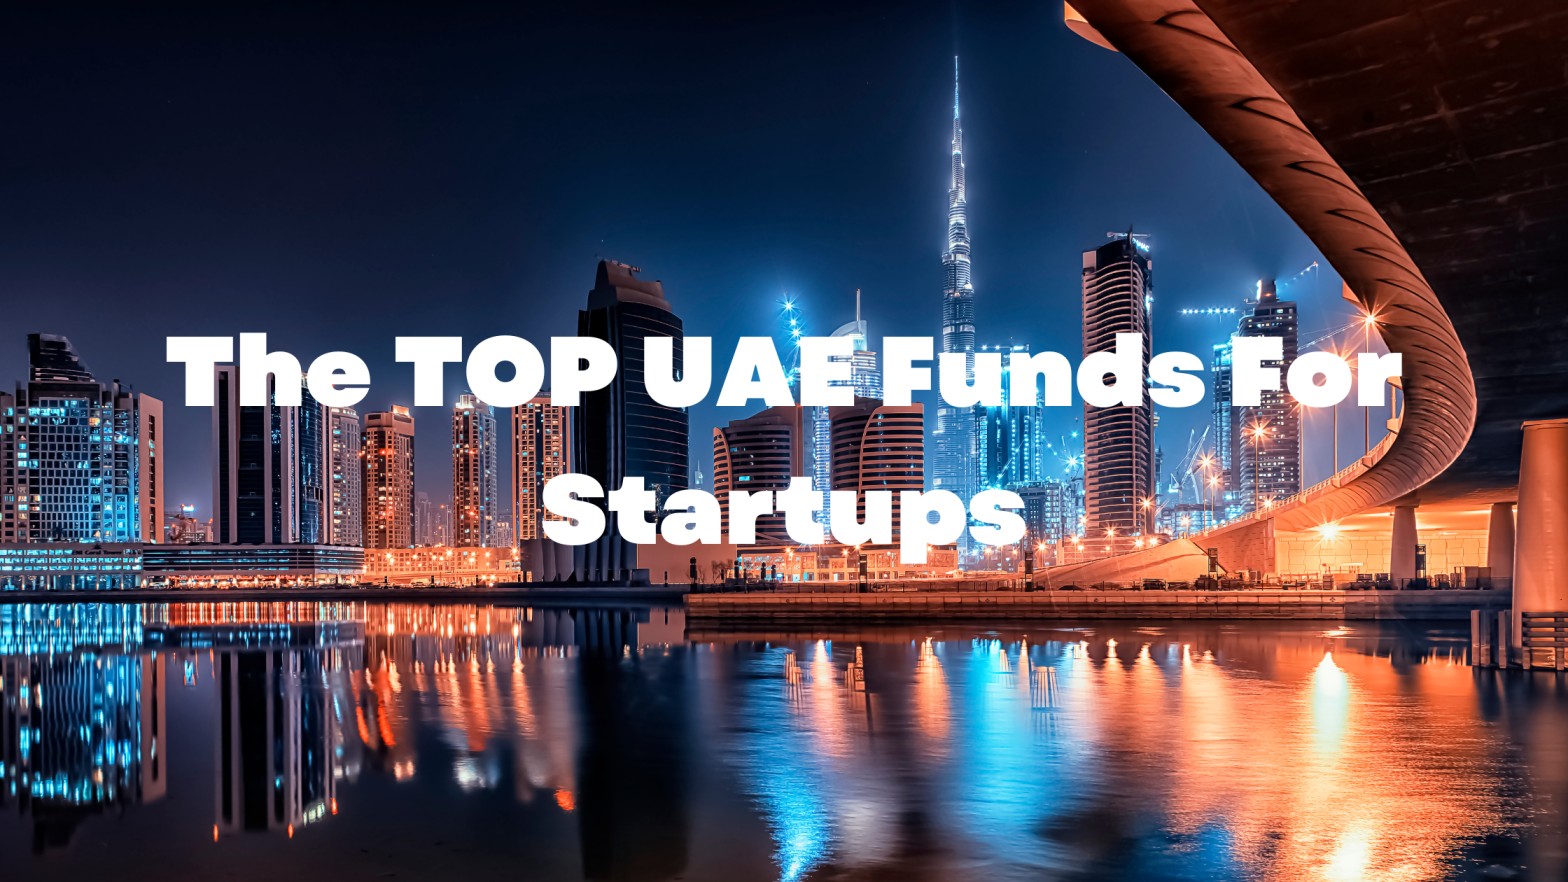 UAE Startup Investment Opportunities: A Guide to Top UAE Funds